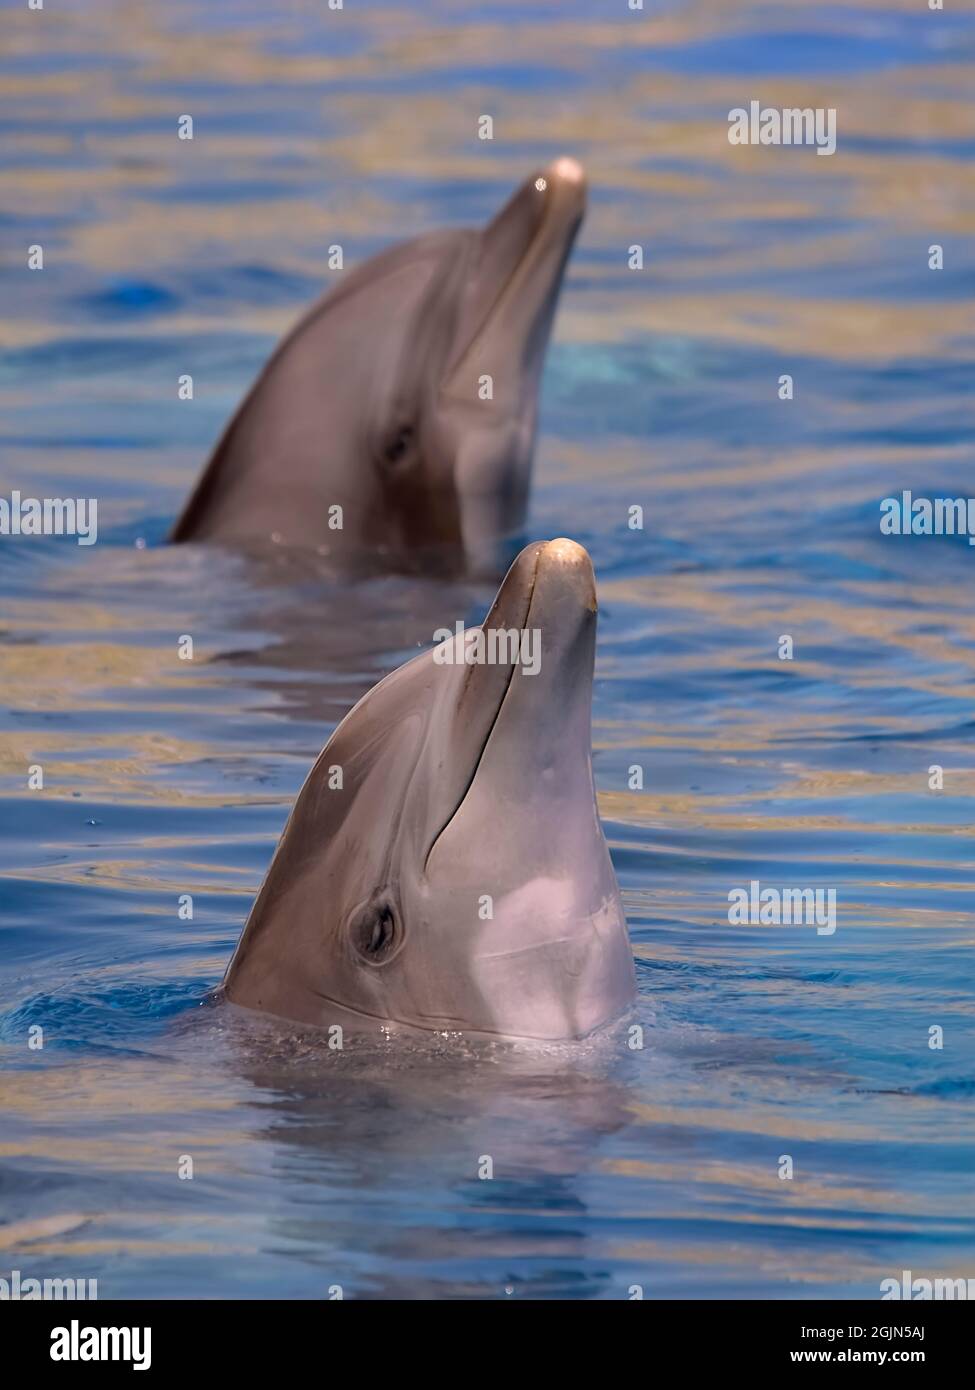 Two portraits of bottlenose dolphins (Tursiops truncatus) in blue water Stock Photo